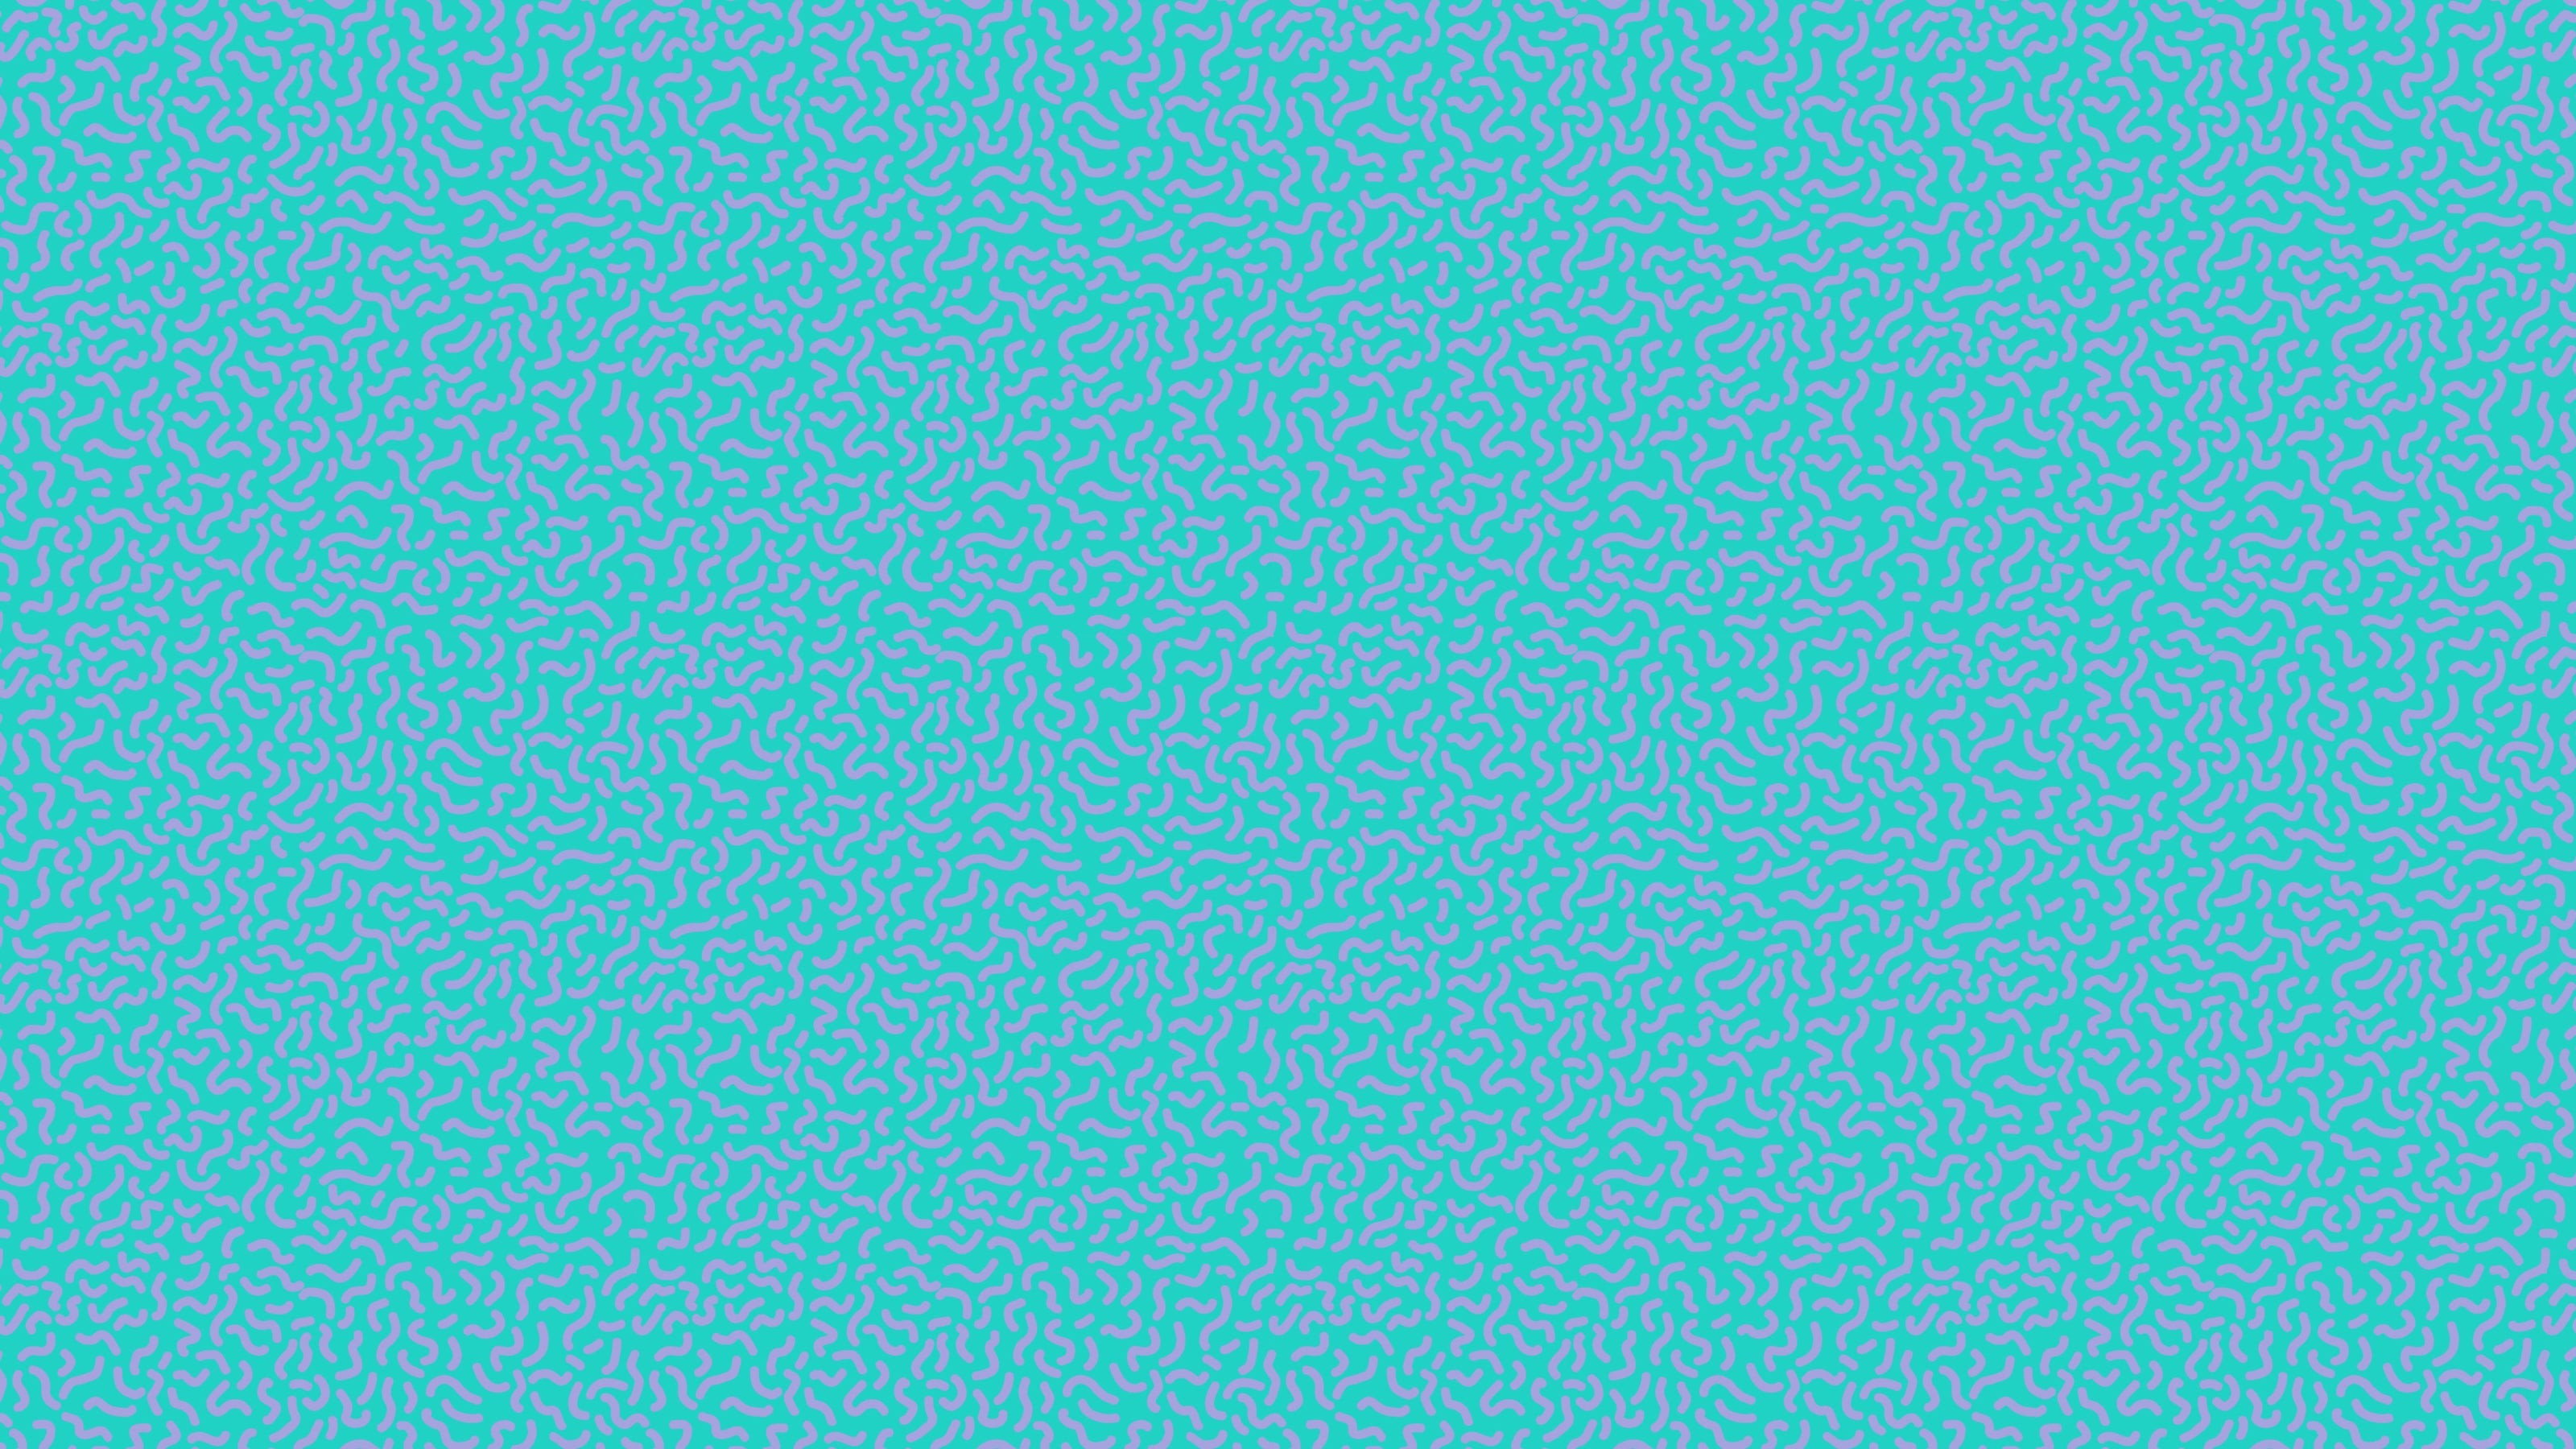 Lilac Squiggles on Teal Background